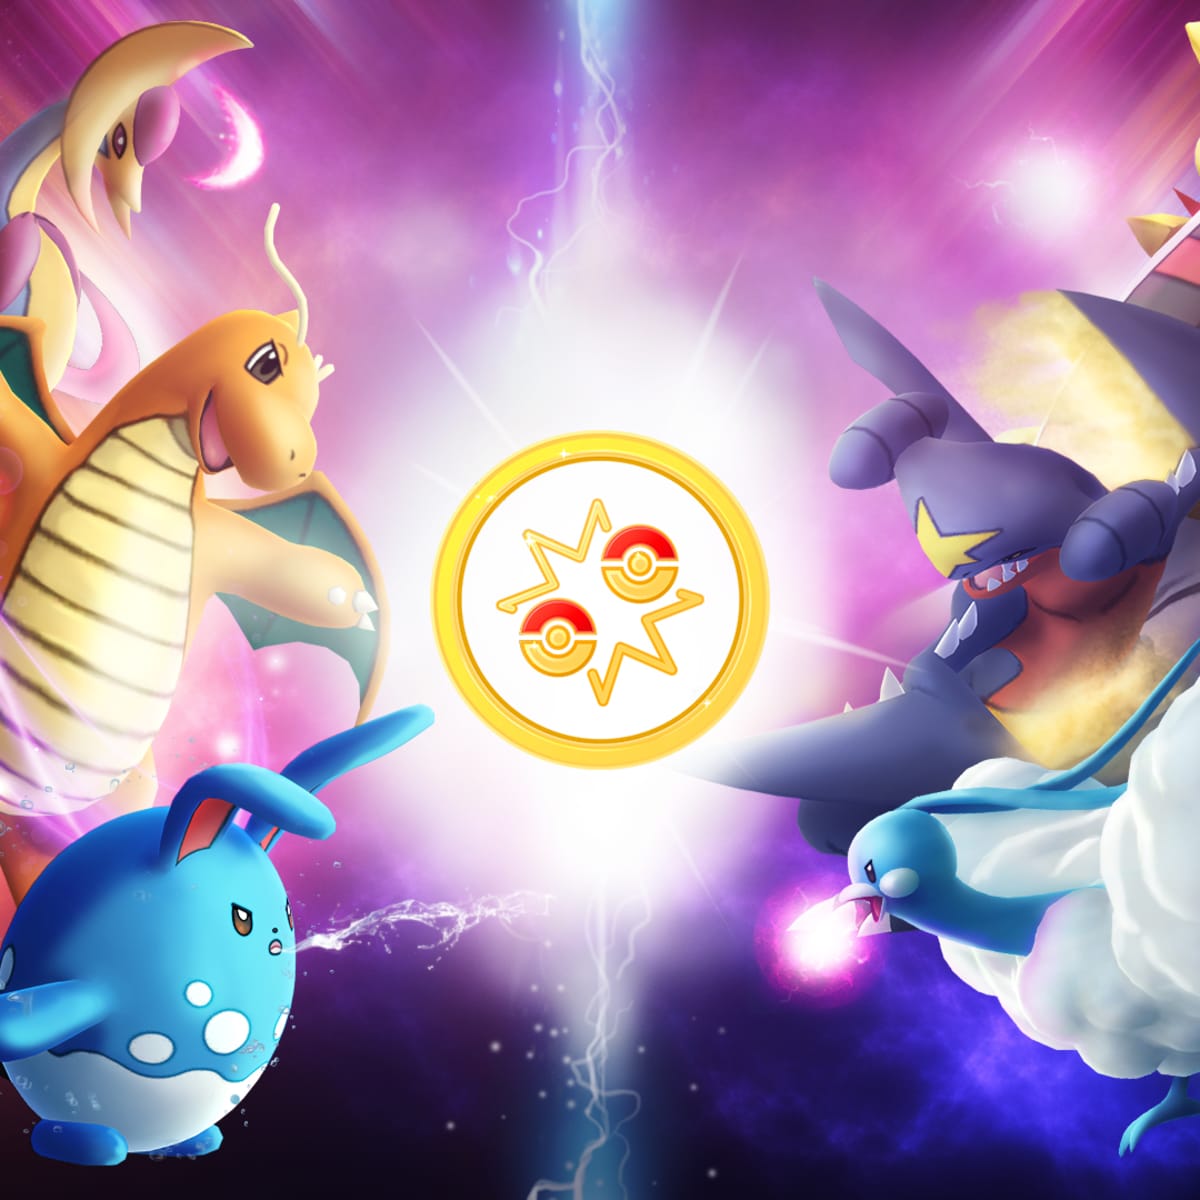 10 best charged attacks for Pokemon GO PvP